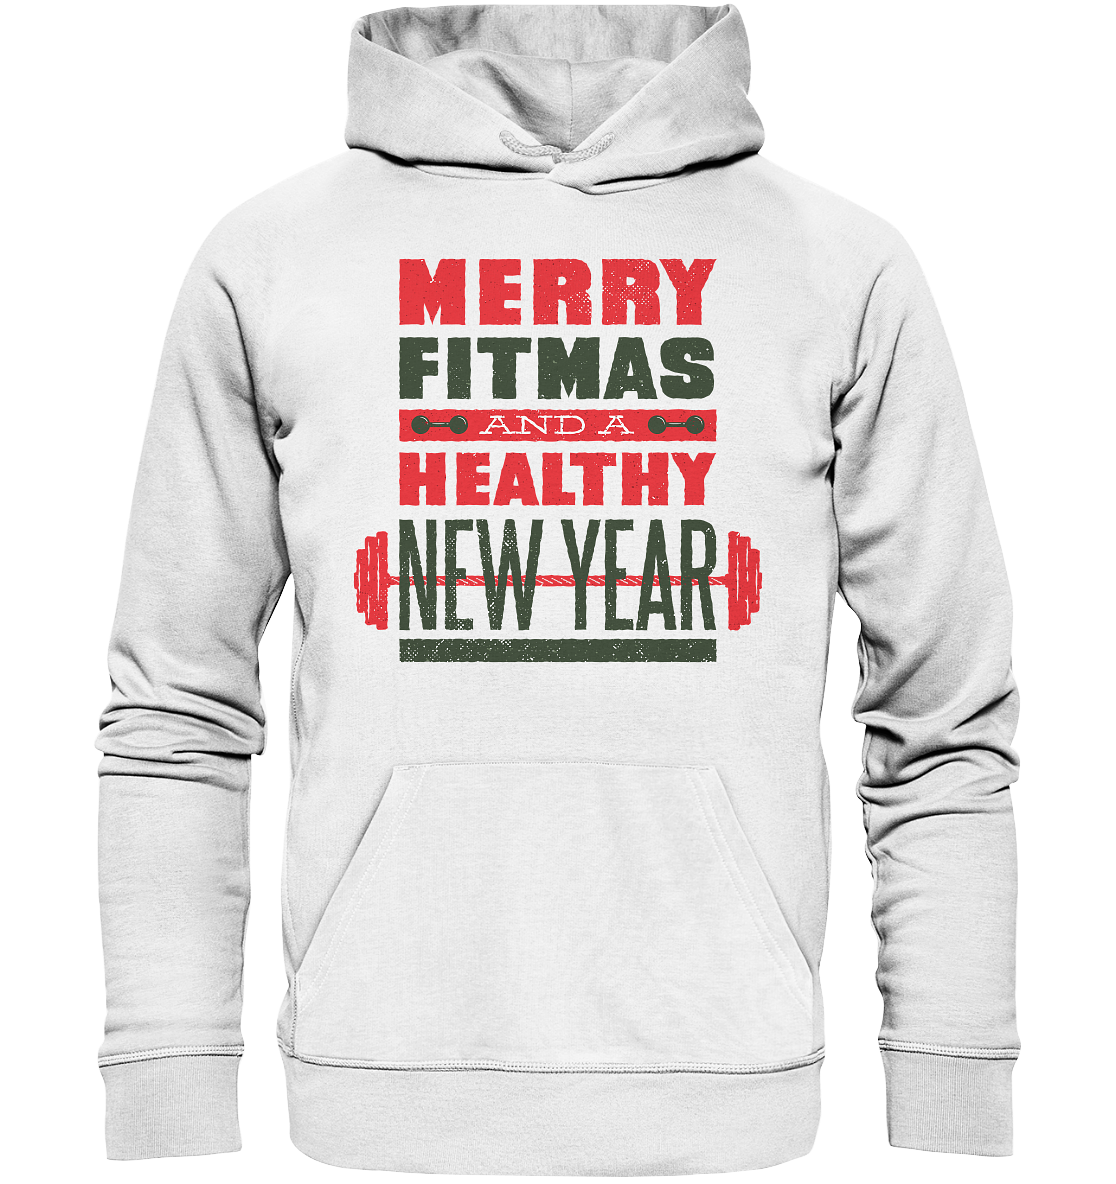 Christmas design, Gym, Merry Fitmas and a Healthy New Year - Organic Basic Hoodie